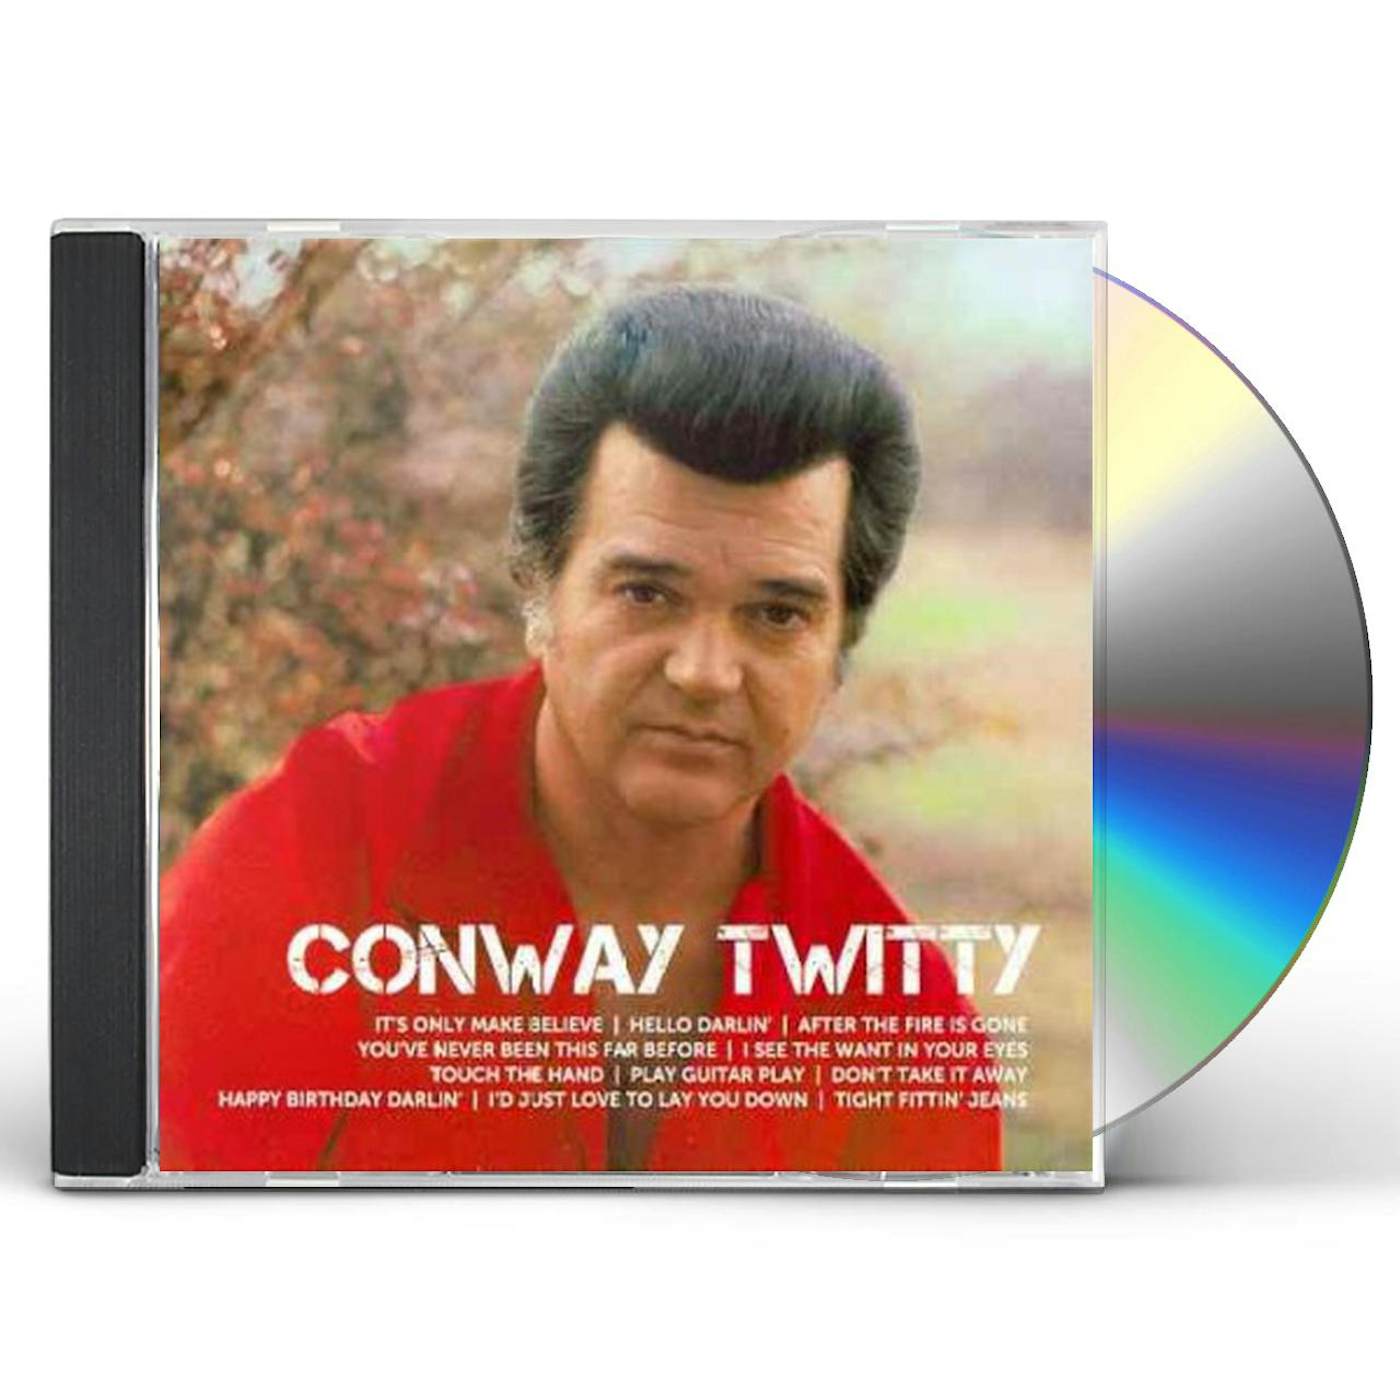 Conway Twitty ICON CD